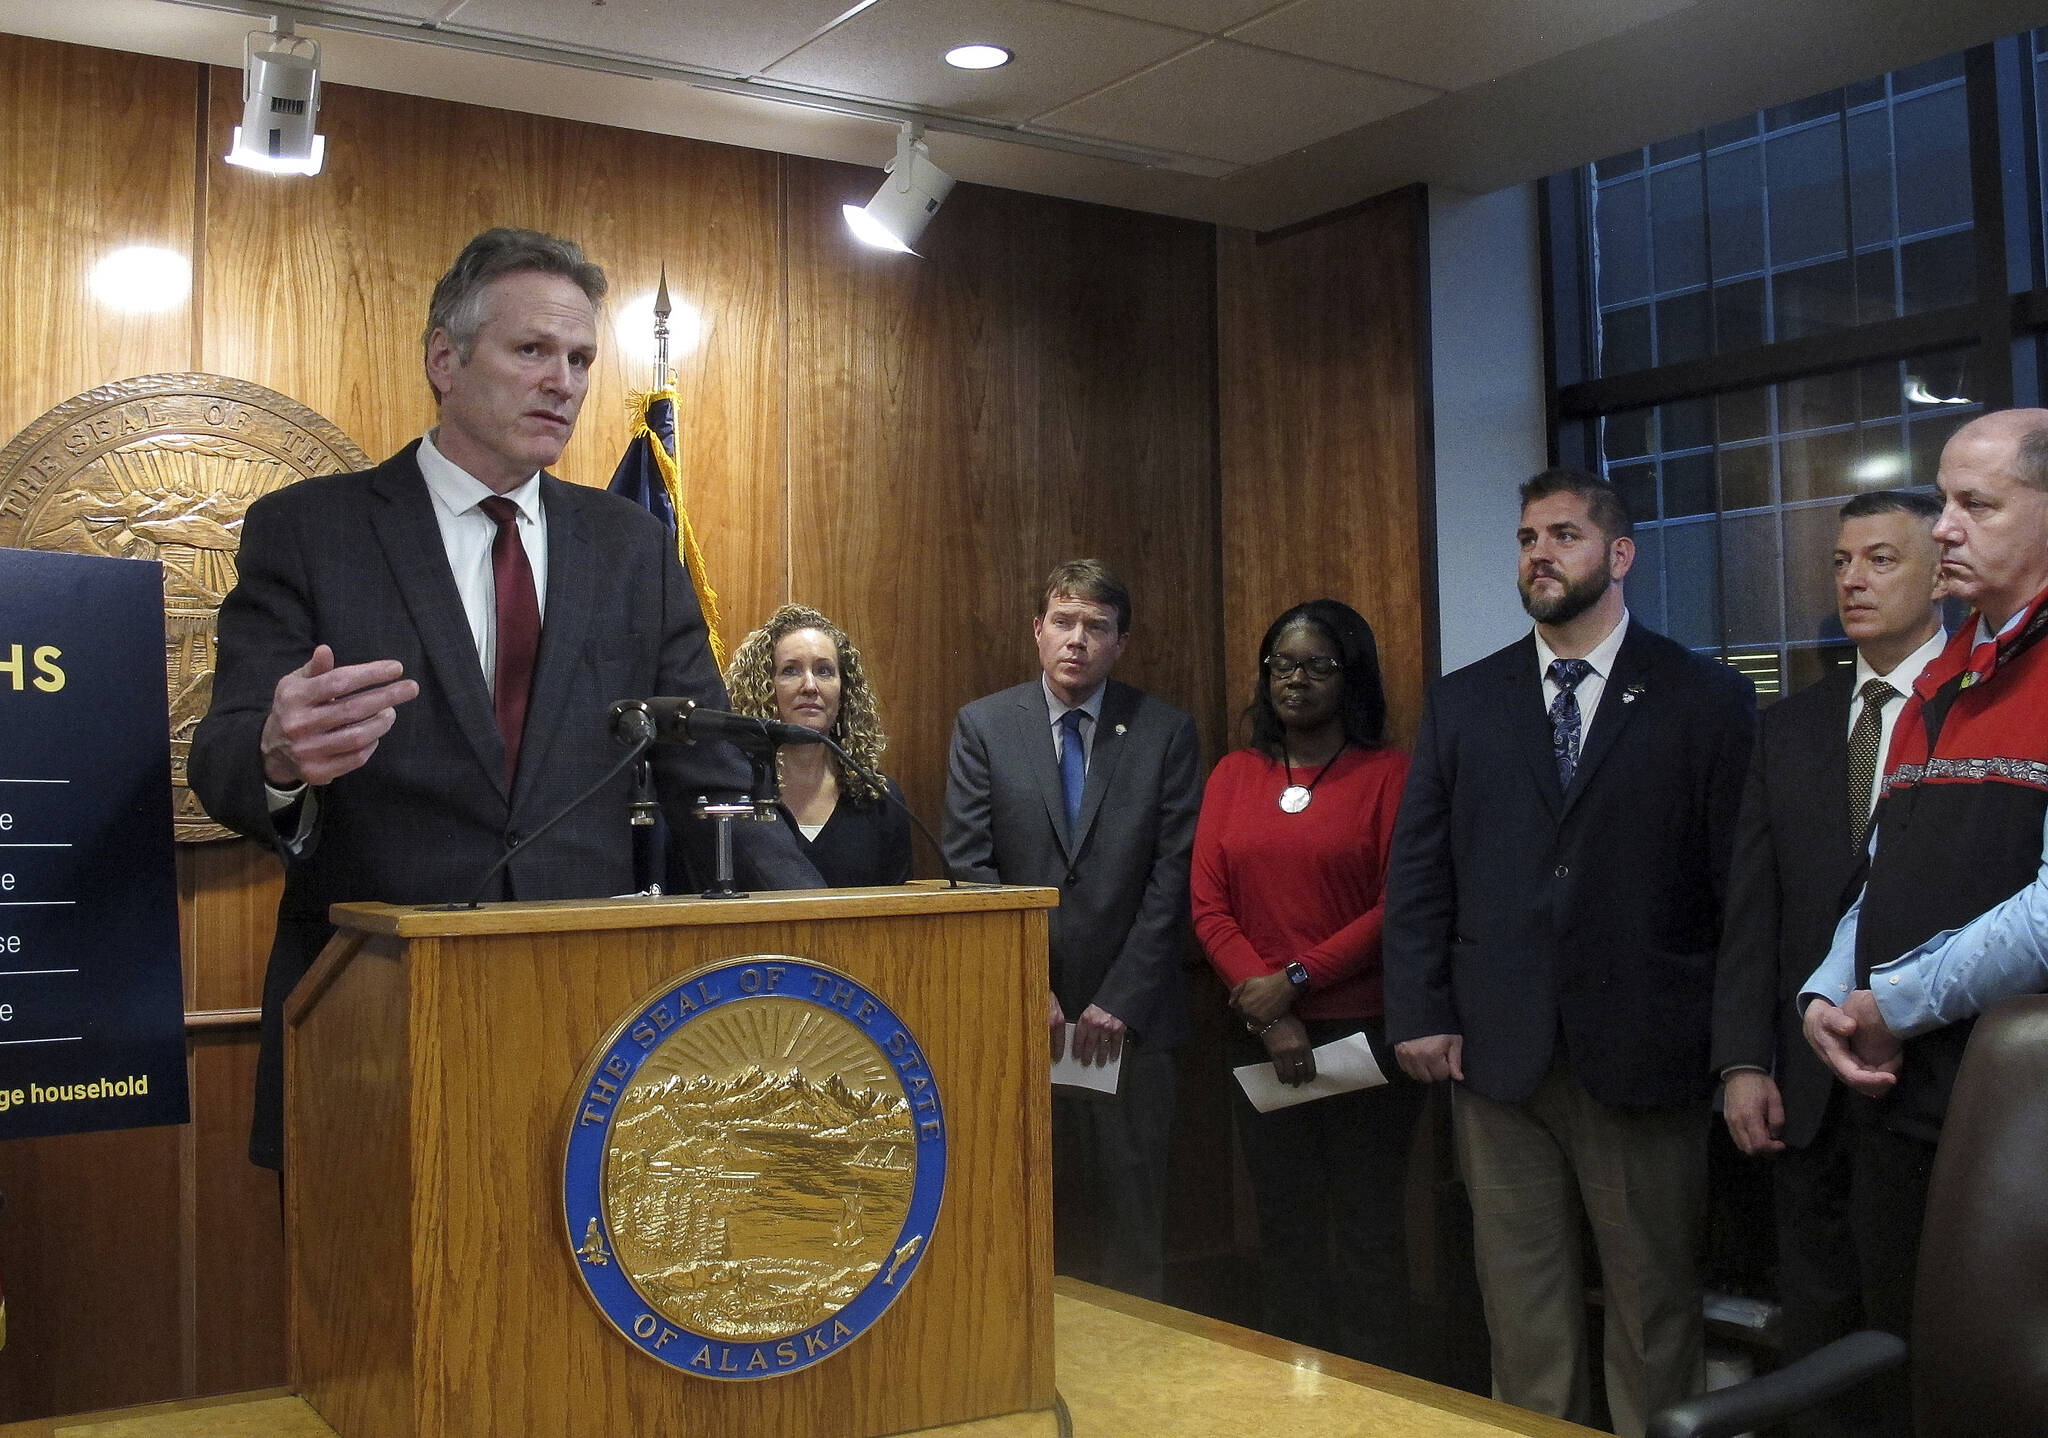 Alaska Gov. Mike Dunleavy, left, speaks to reporters during a news conference on his proposed budget, Thursday, Dec. 15, 2022, in Juneau, Alaska, with members of his Cabinet also pictured. Dunleavy called the budget a starting point for discussions with lawmakers, who convene for a new legislative session in January. (AP Photo/Becky Bohrer)